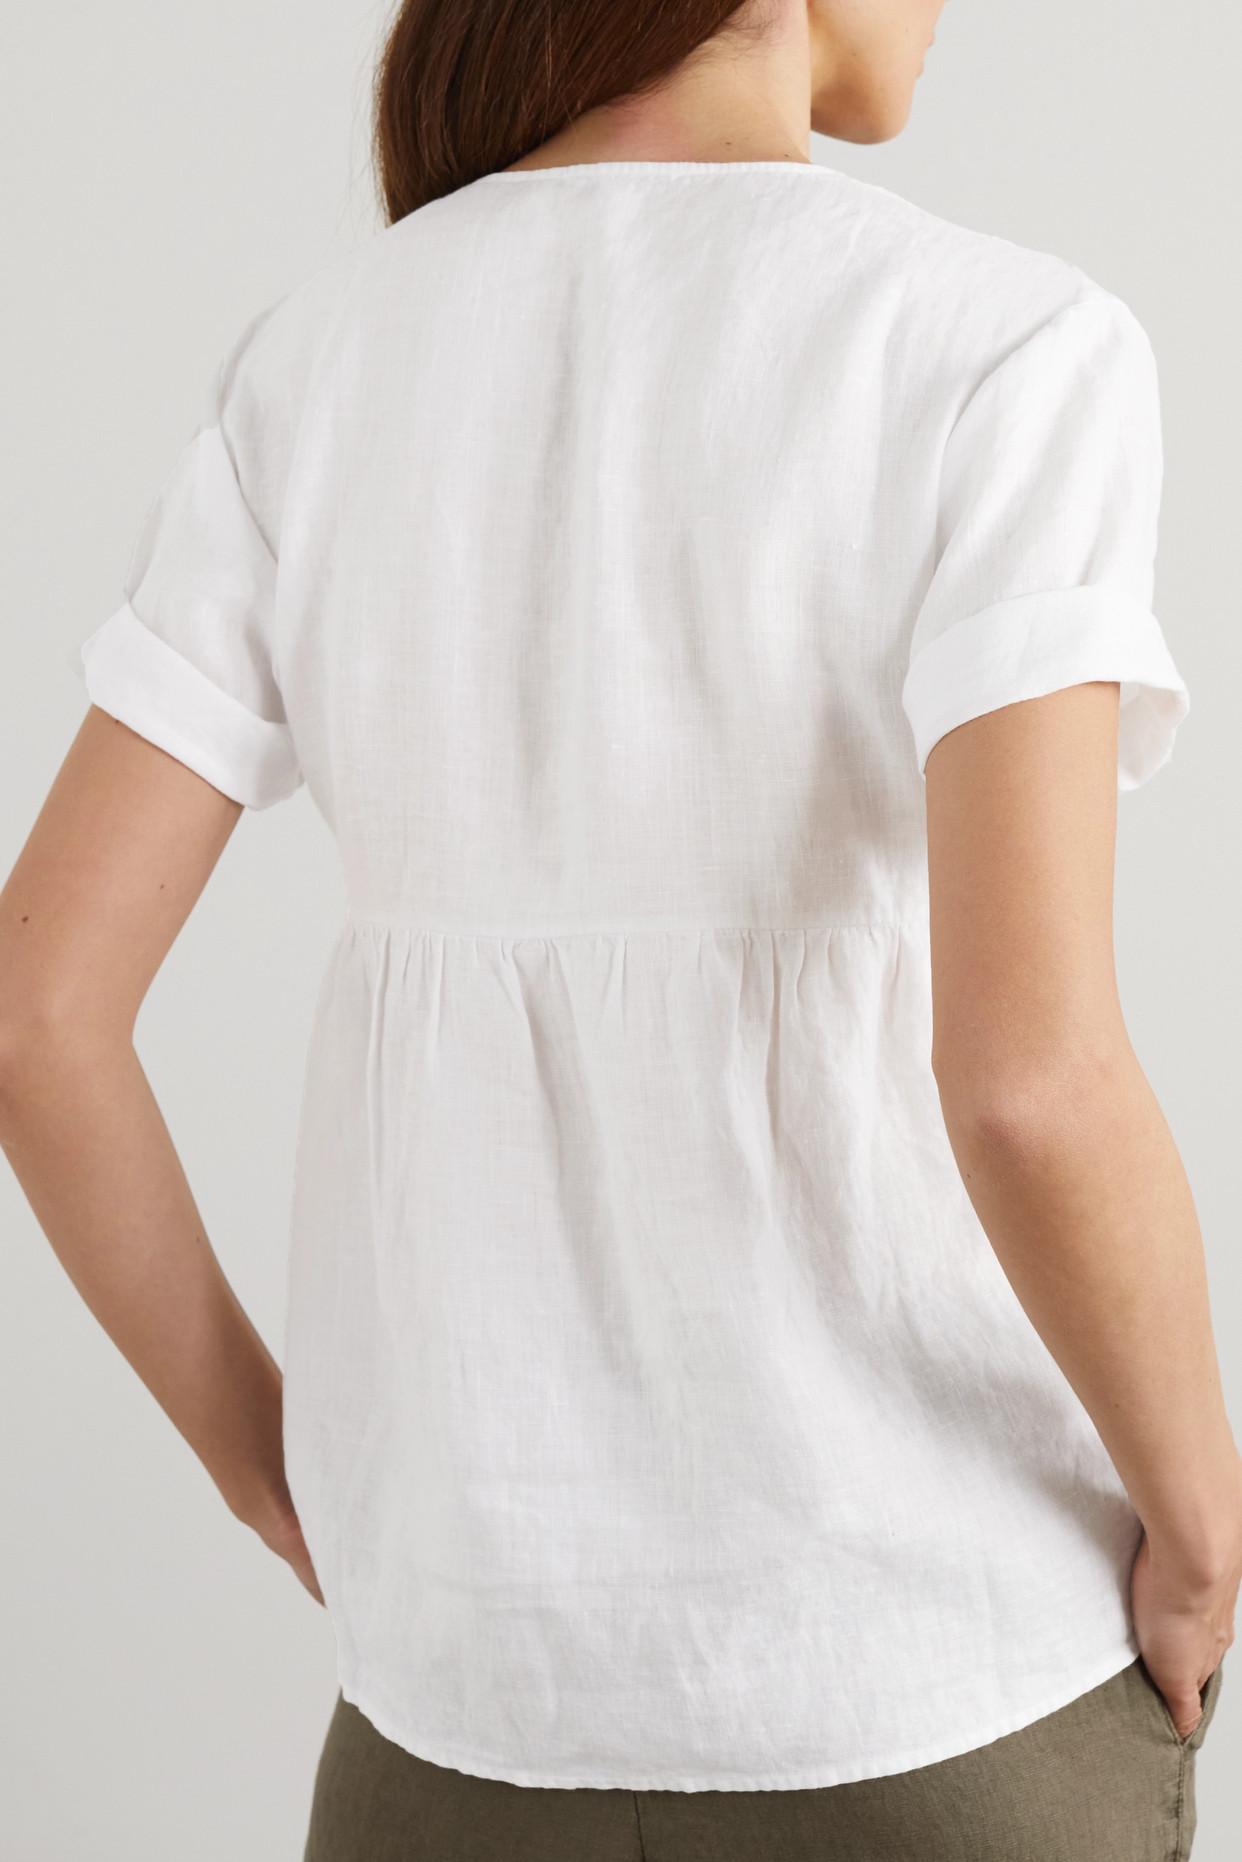 James Perse Gathered Linen Top in White | Lyst